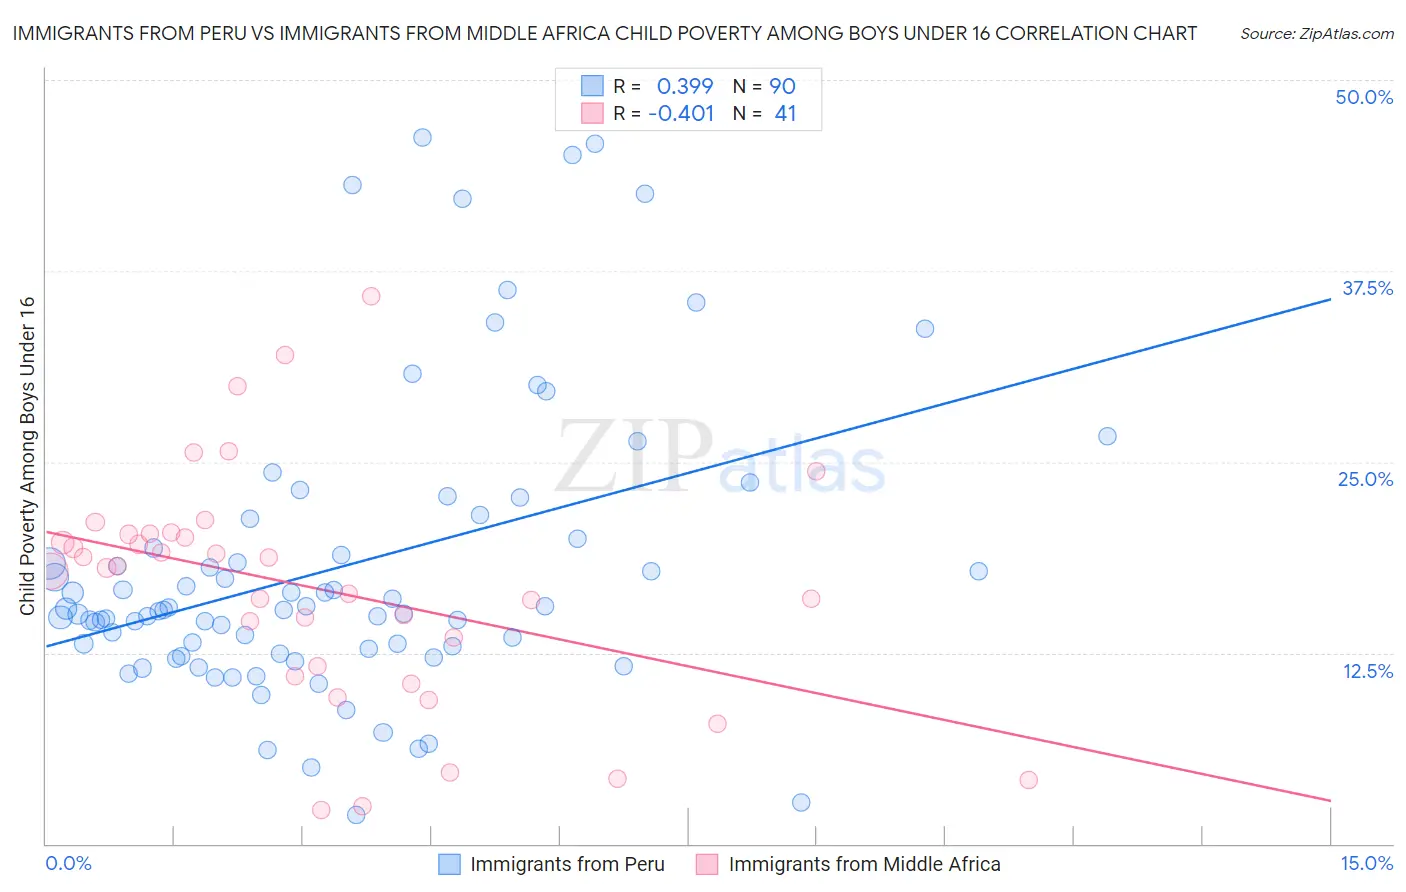 Immigrants from Peru vs Immigrants from Middle Africa Child Poverty Among Boys Under 16